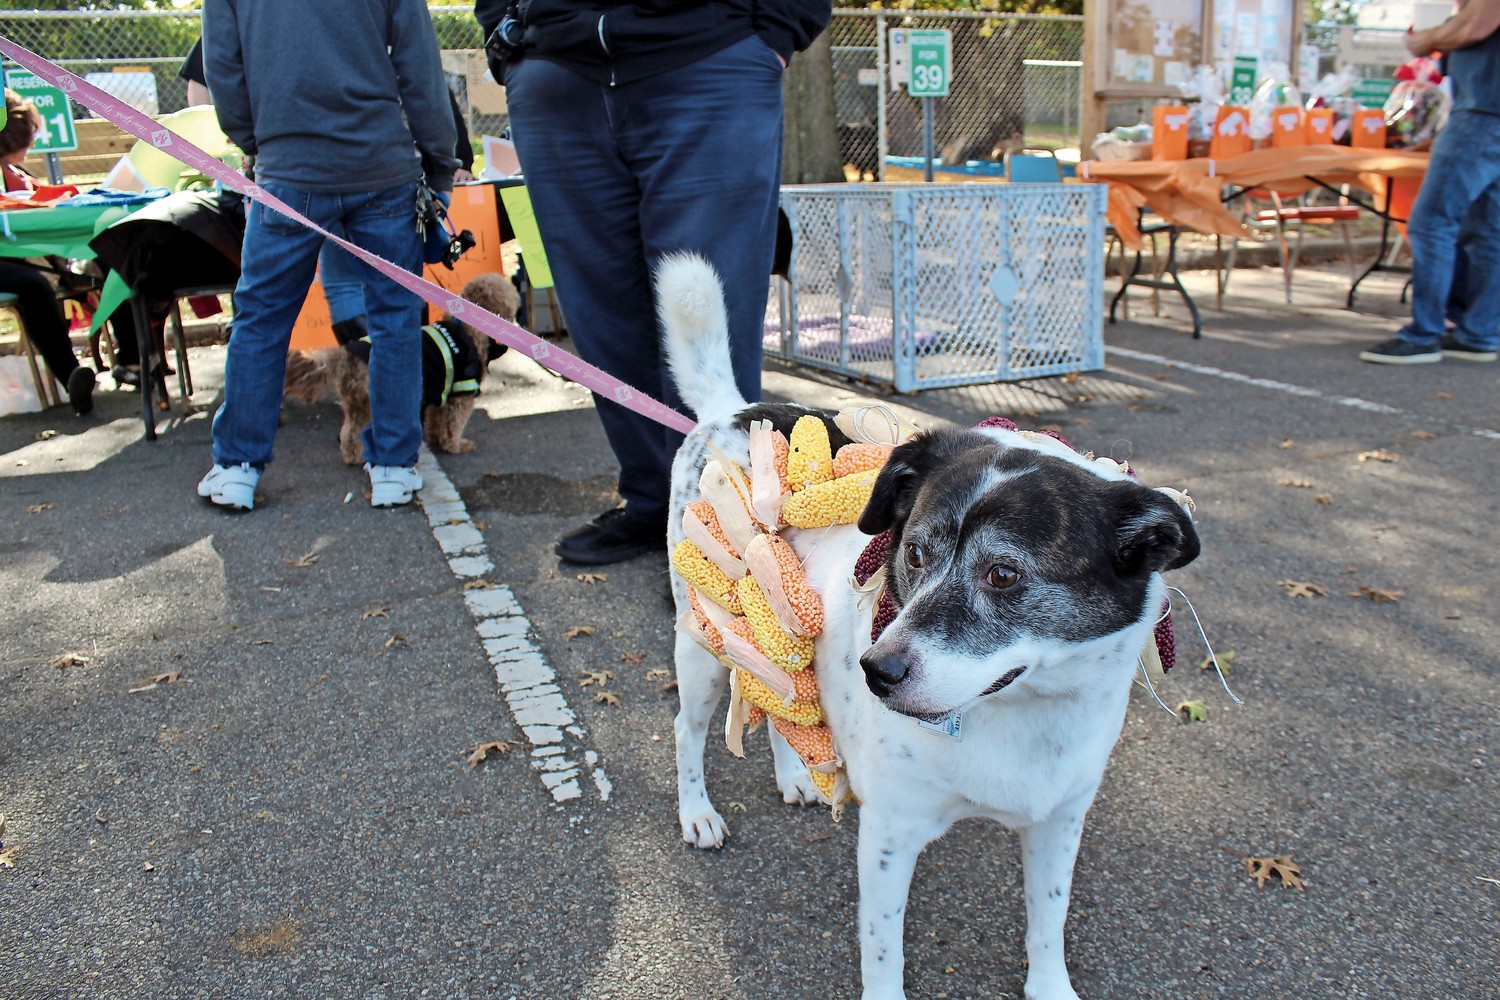 Sofia Weiner won first-place in the Most Original Costume category for her portrayal of a corn dog.